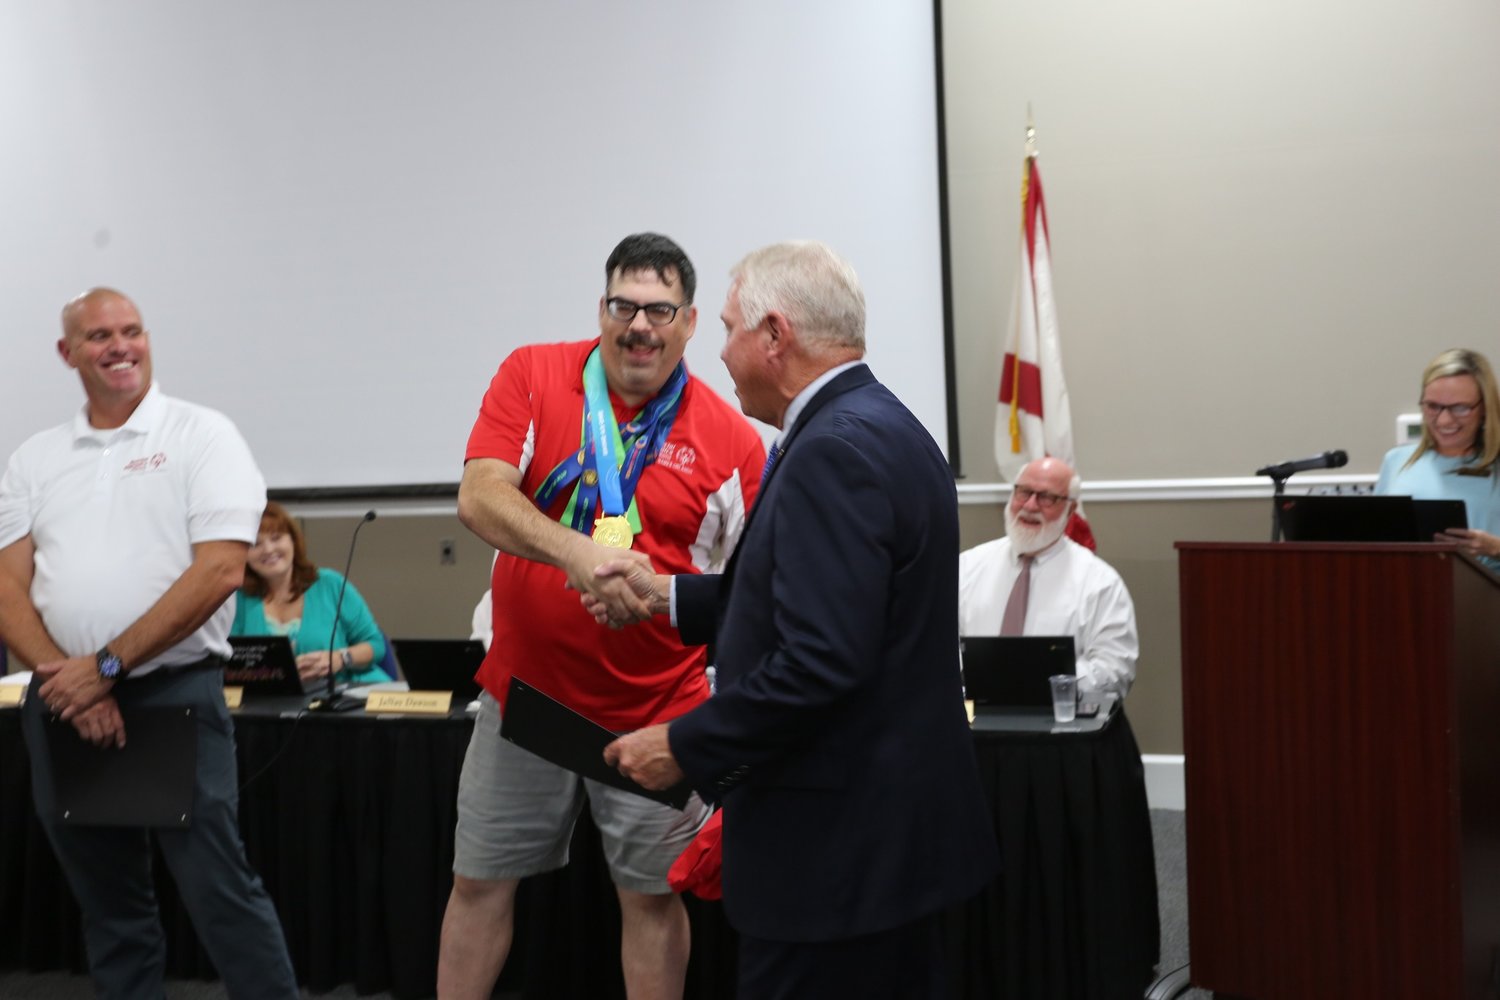 Powerlifter Jerry Wise greets Baldwin County Superintendent Eddie Tyler during Baldwin County Board of Education’s June 23 meeting. Wise was recognized for his performance at the USA Games in Orlando earlier this month.